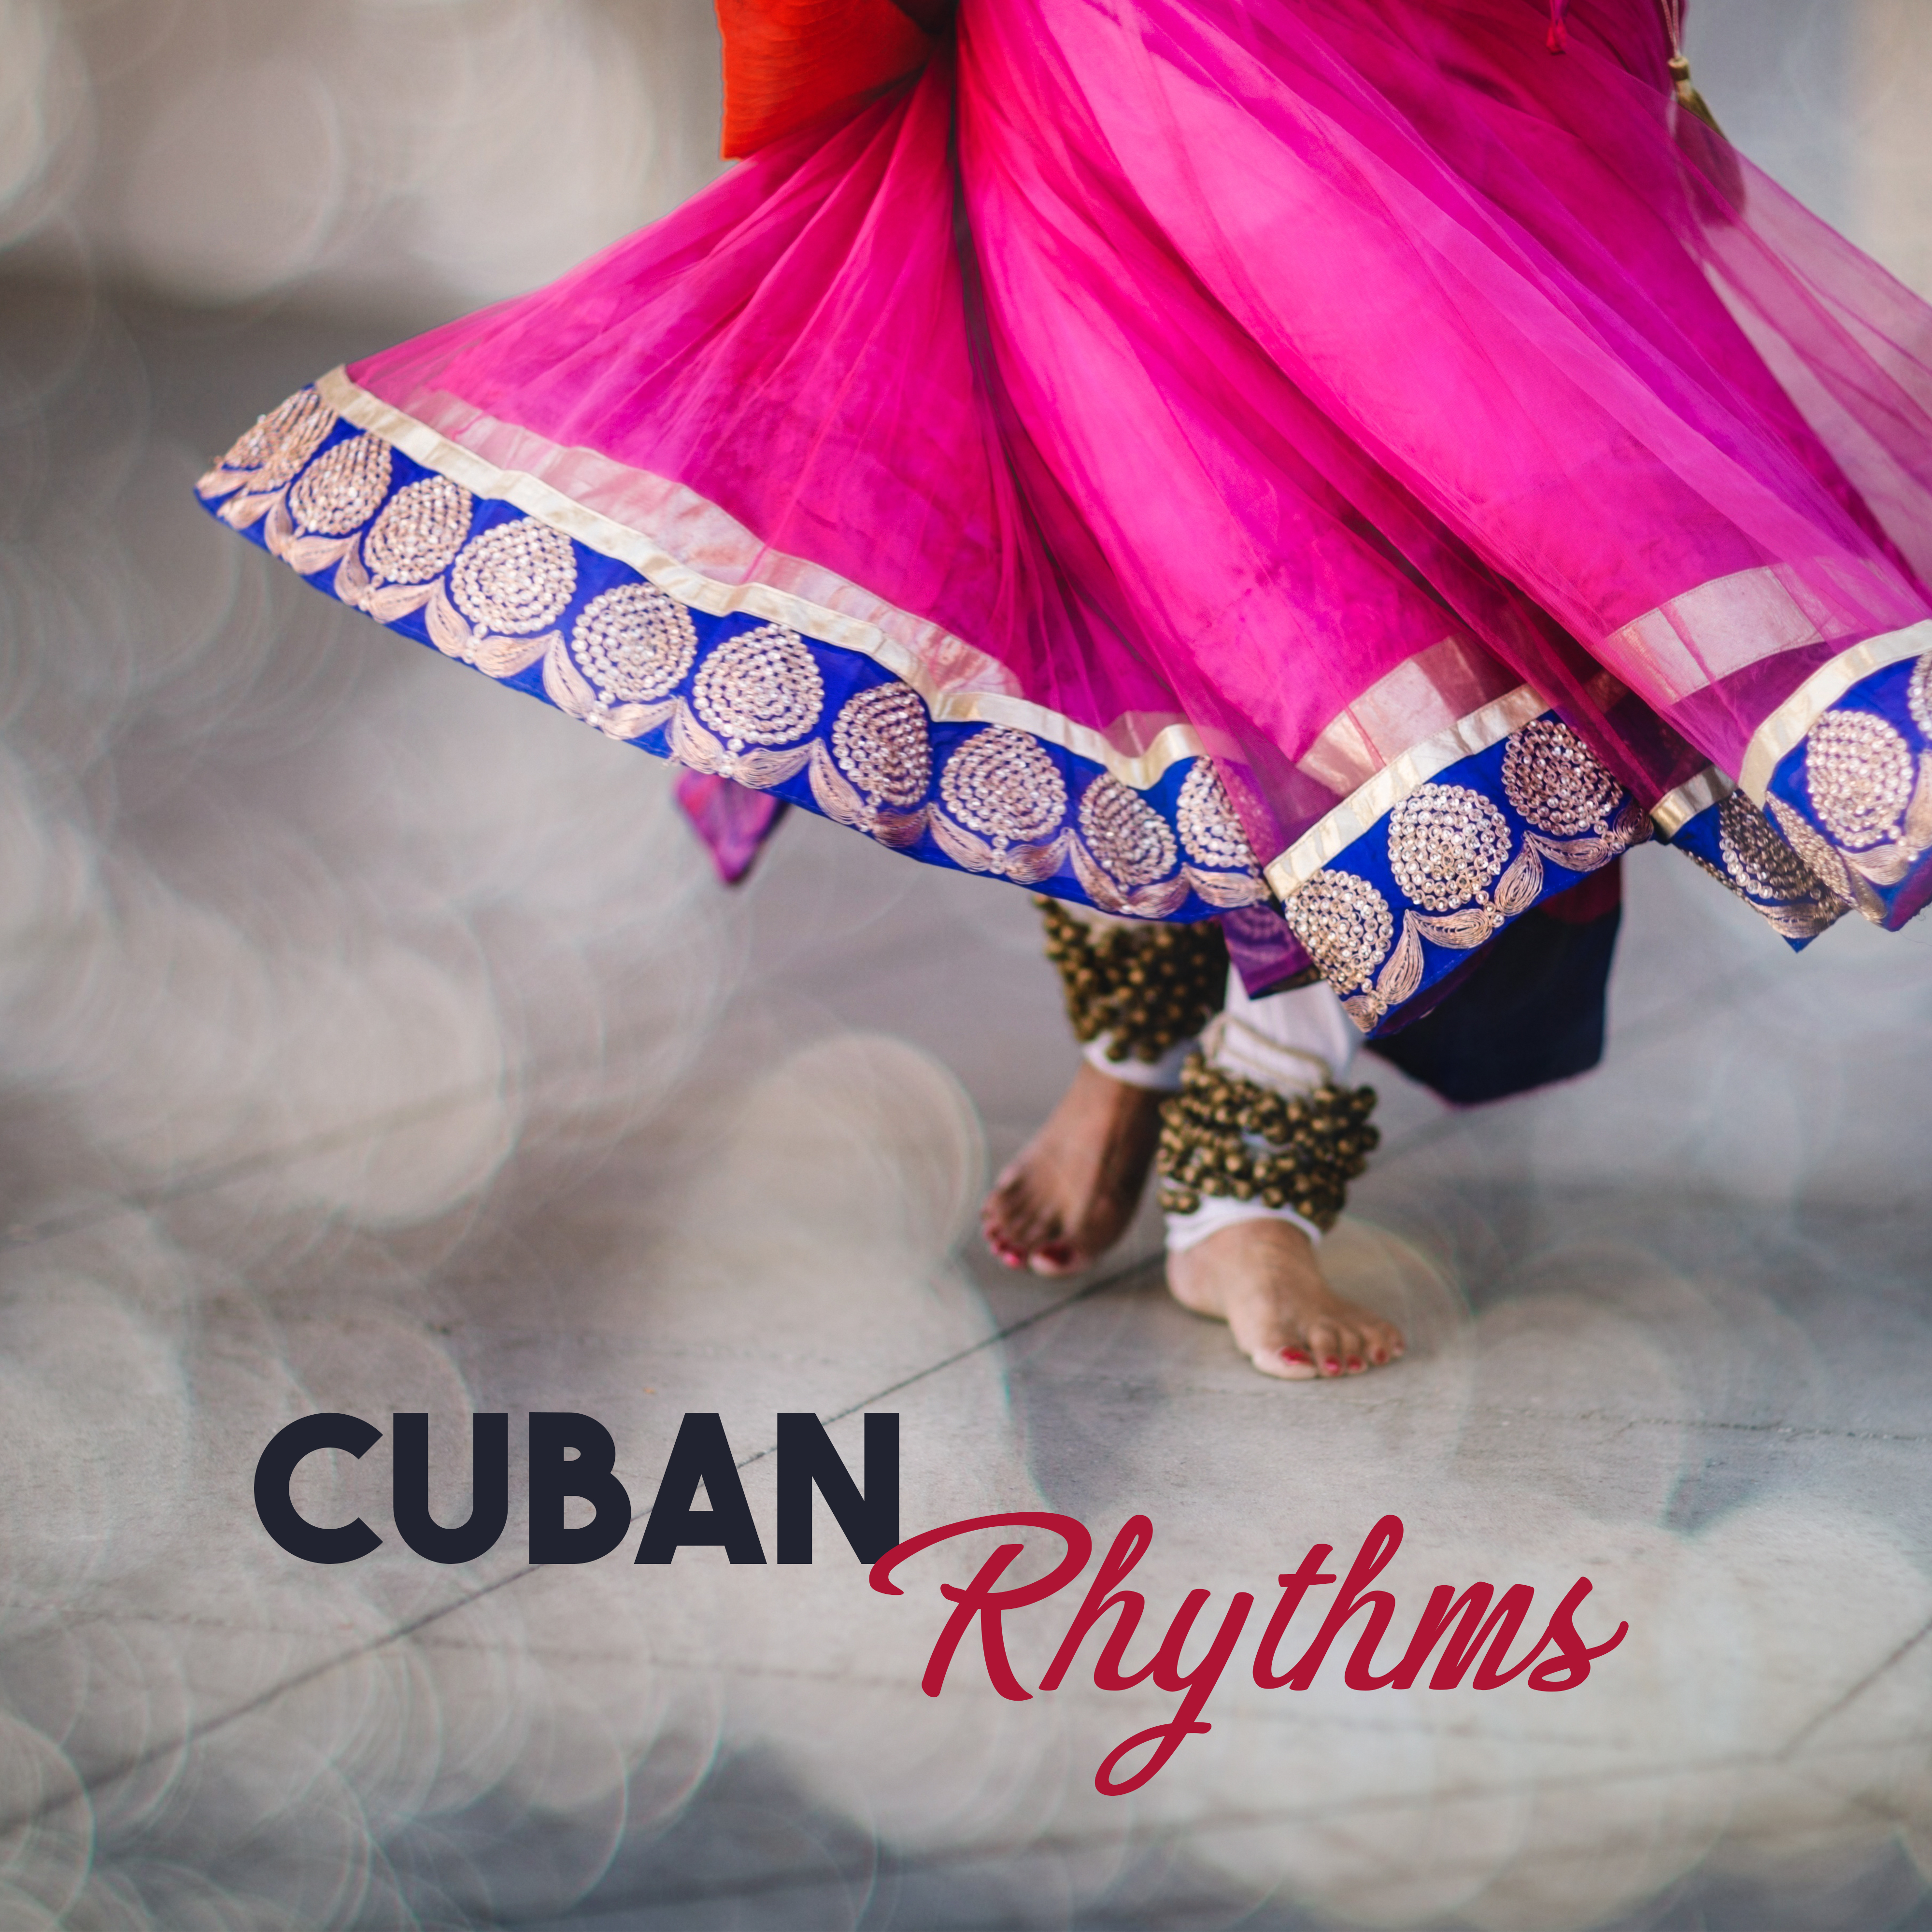 Cuban Rhythms - Hot Island, Fantastic Holiday, Time to Relax, Music is the Best, Sounds Party on the Beach, Warm Sunshine